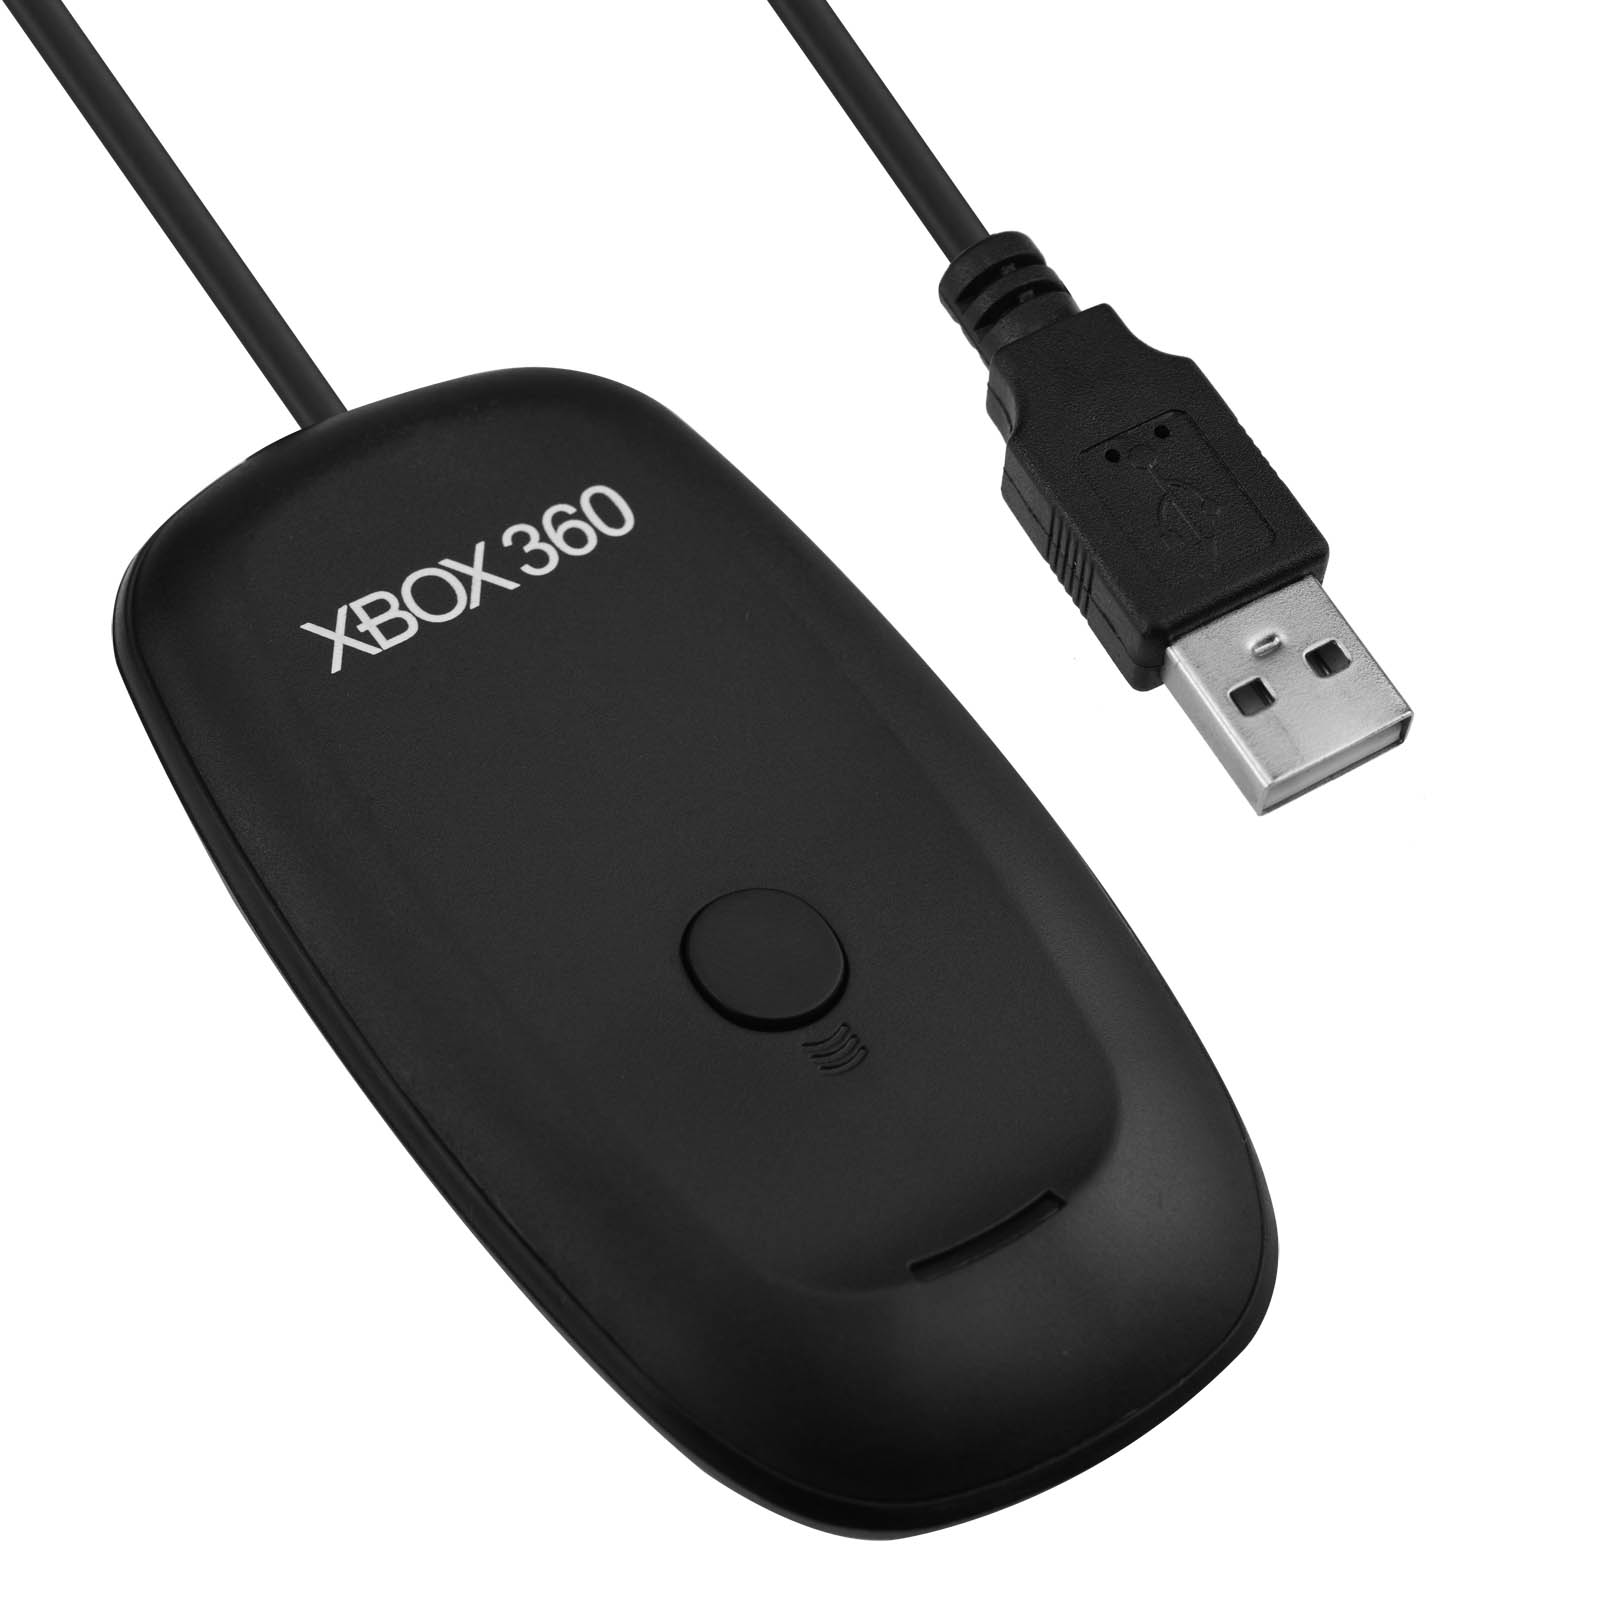 How Much Is The Wireless Adapter For Xbox 360